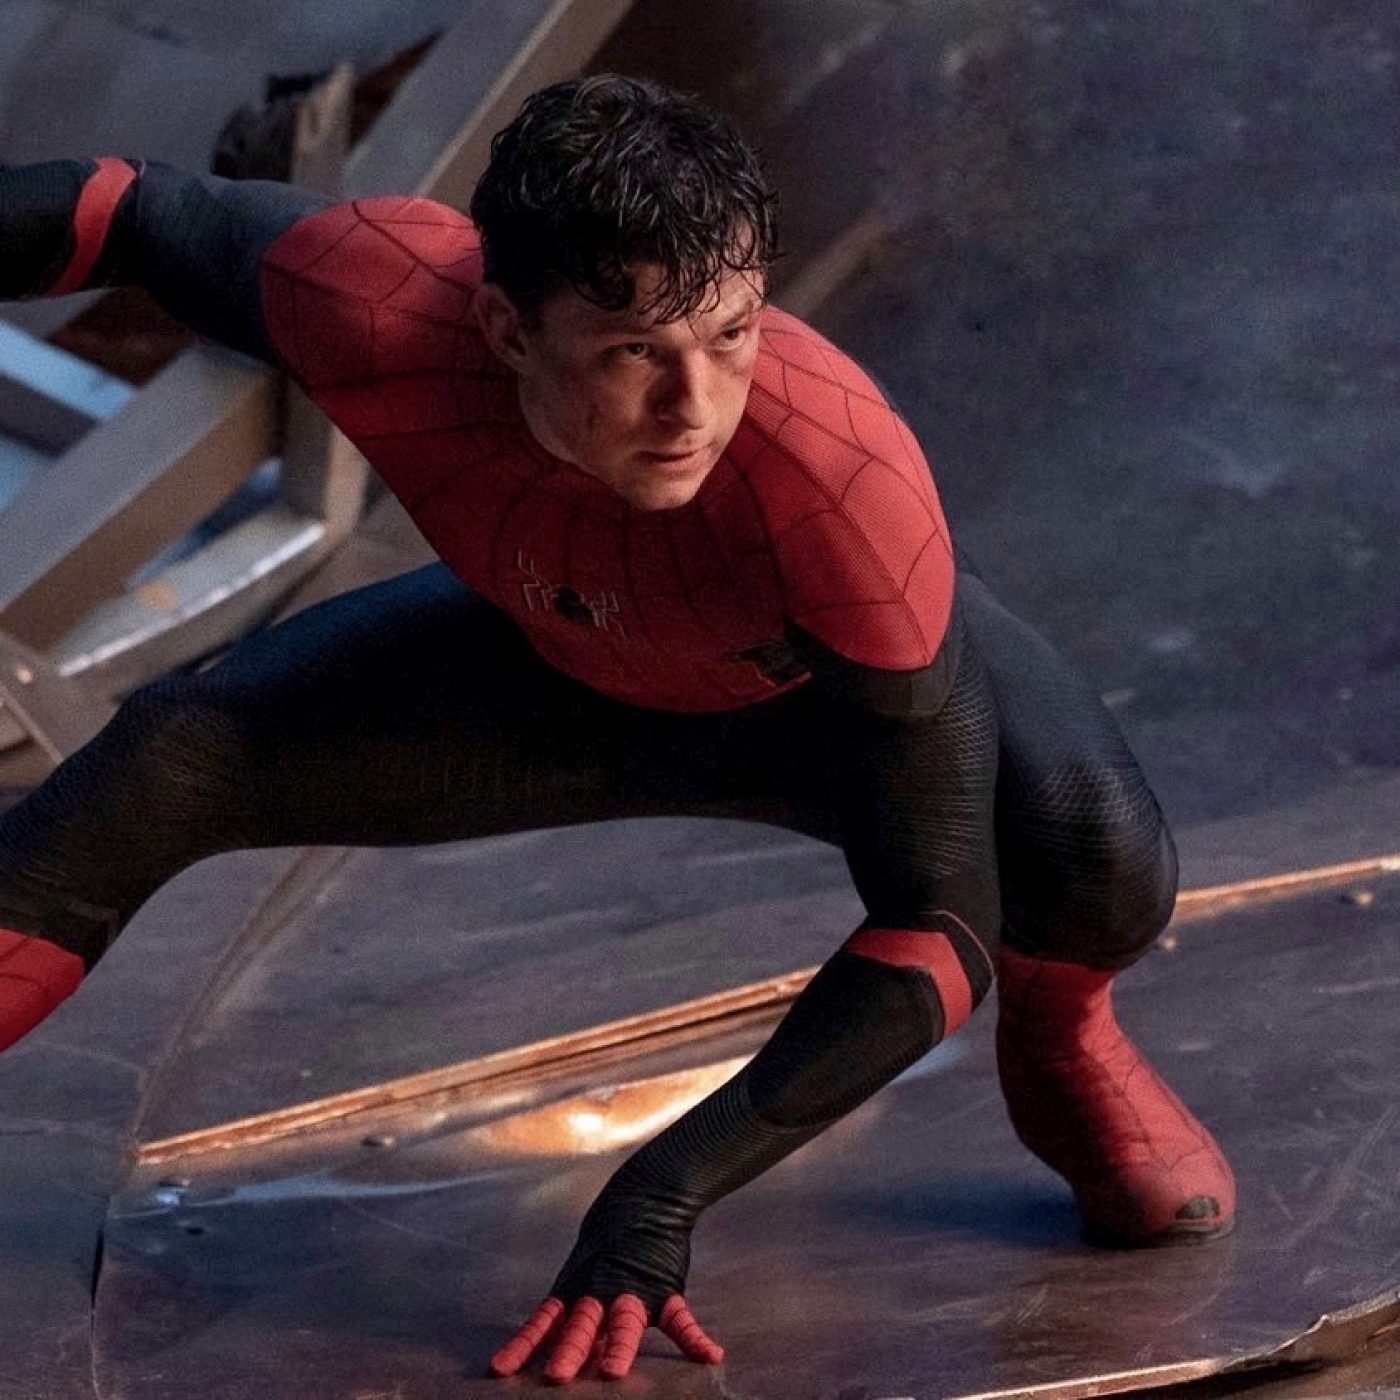 We never saw Spider-Man get bit in the MCU - here's why